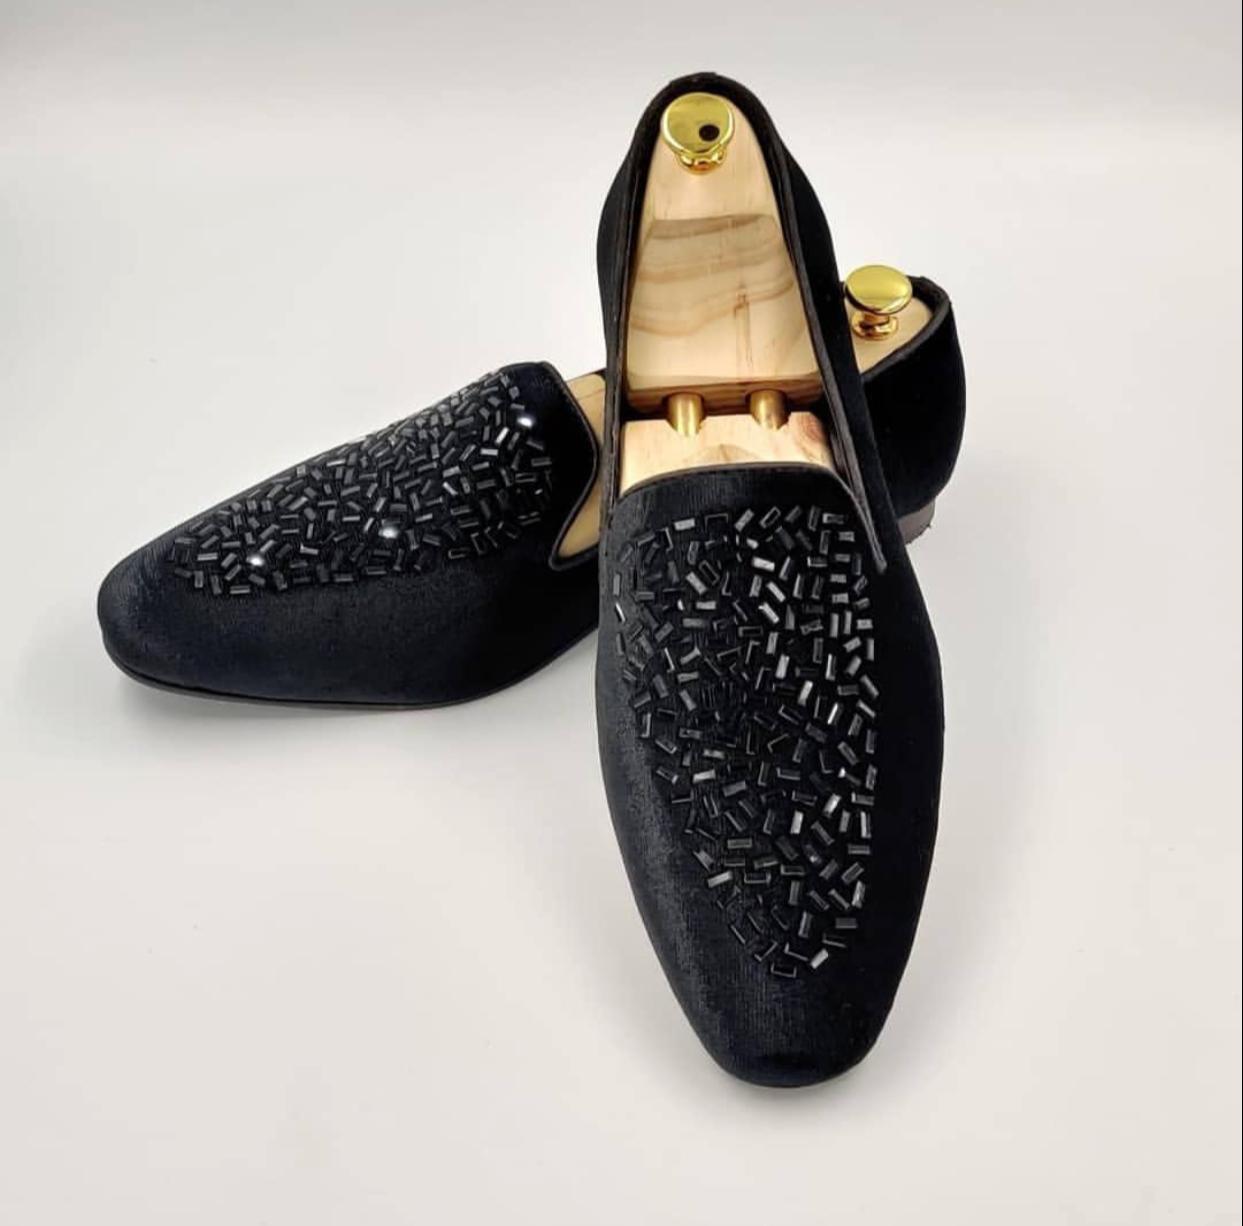 Buy New Arrival Fashion Studded Suede Loafer Shoes For Partywear And Casualwear - JackMarc